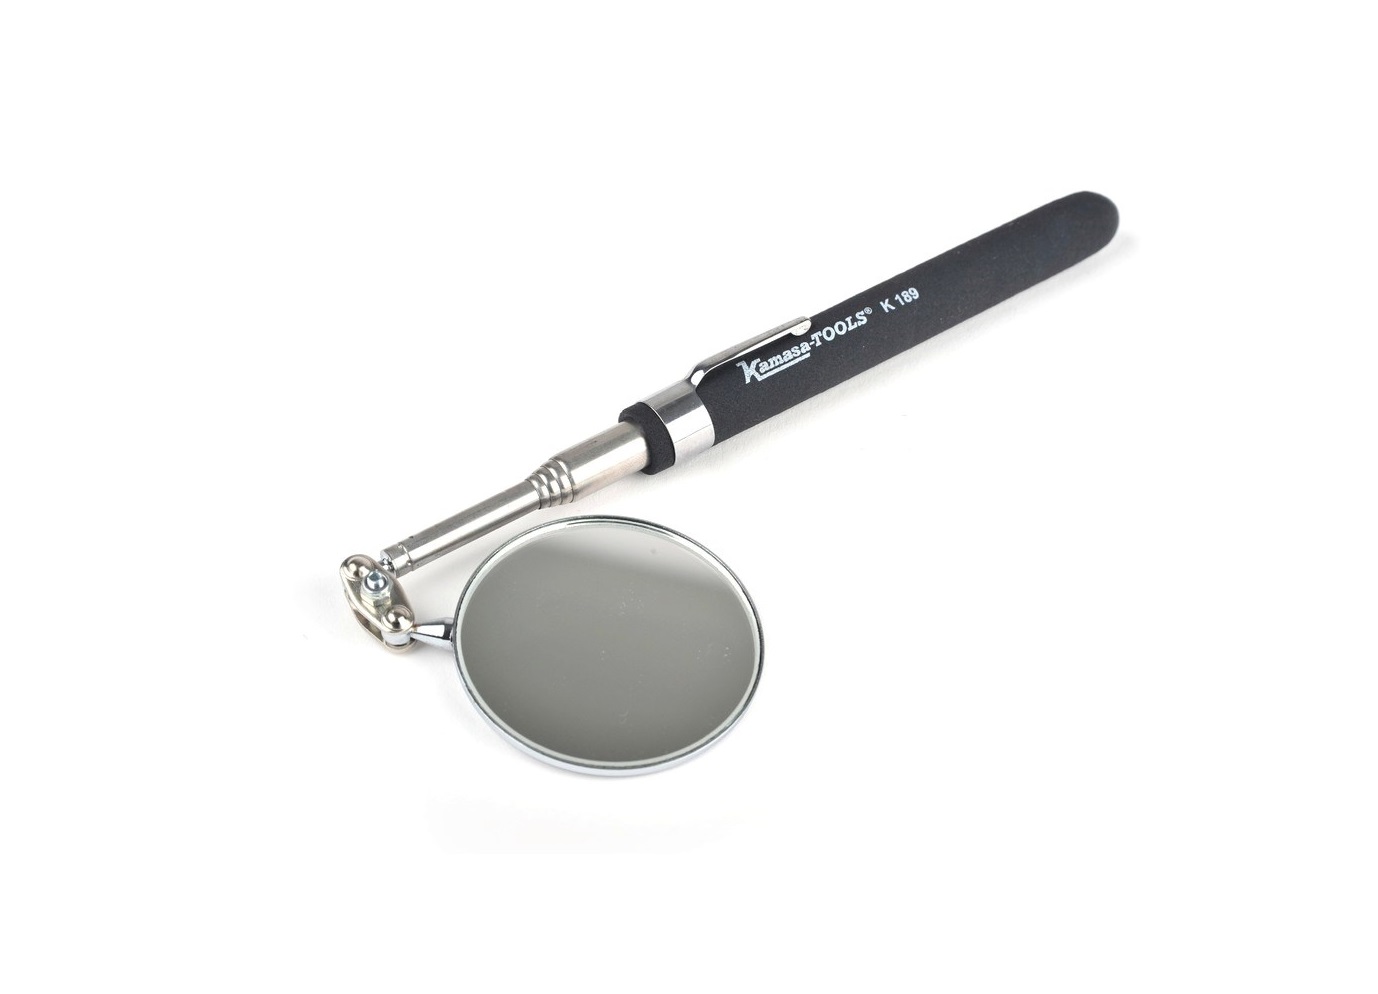 Inspection mirror » Toolwarehouse » Buy Tools Online